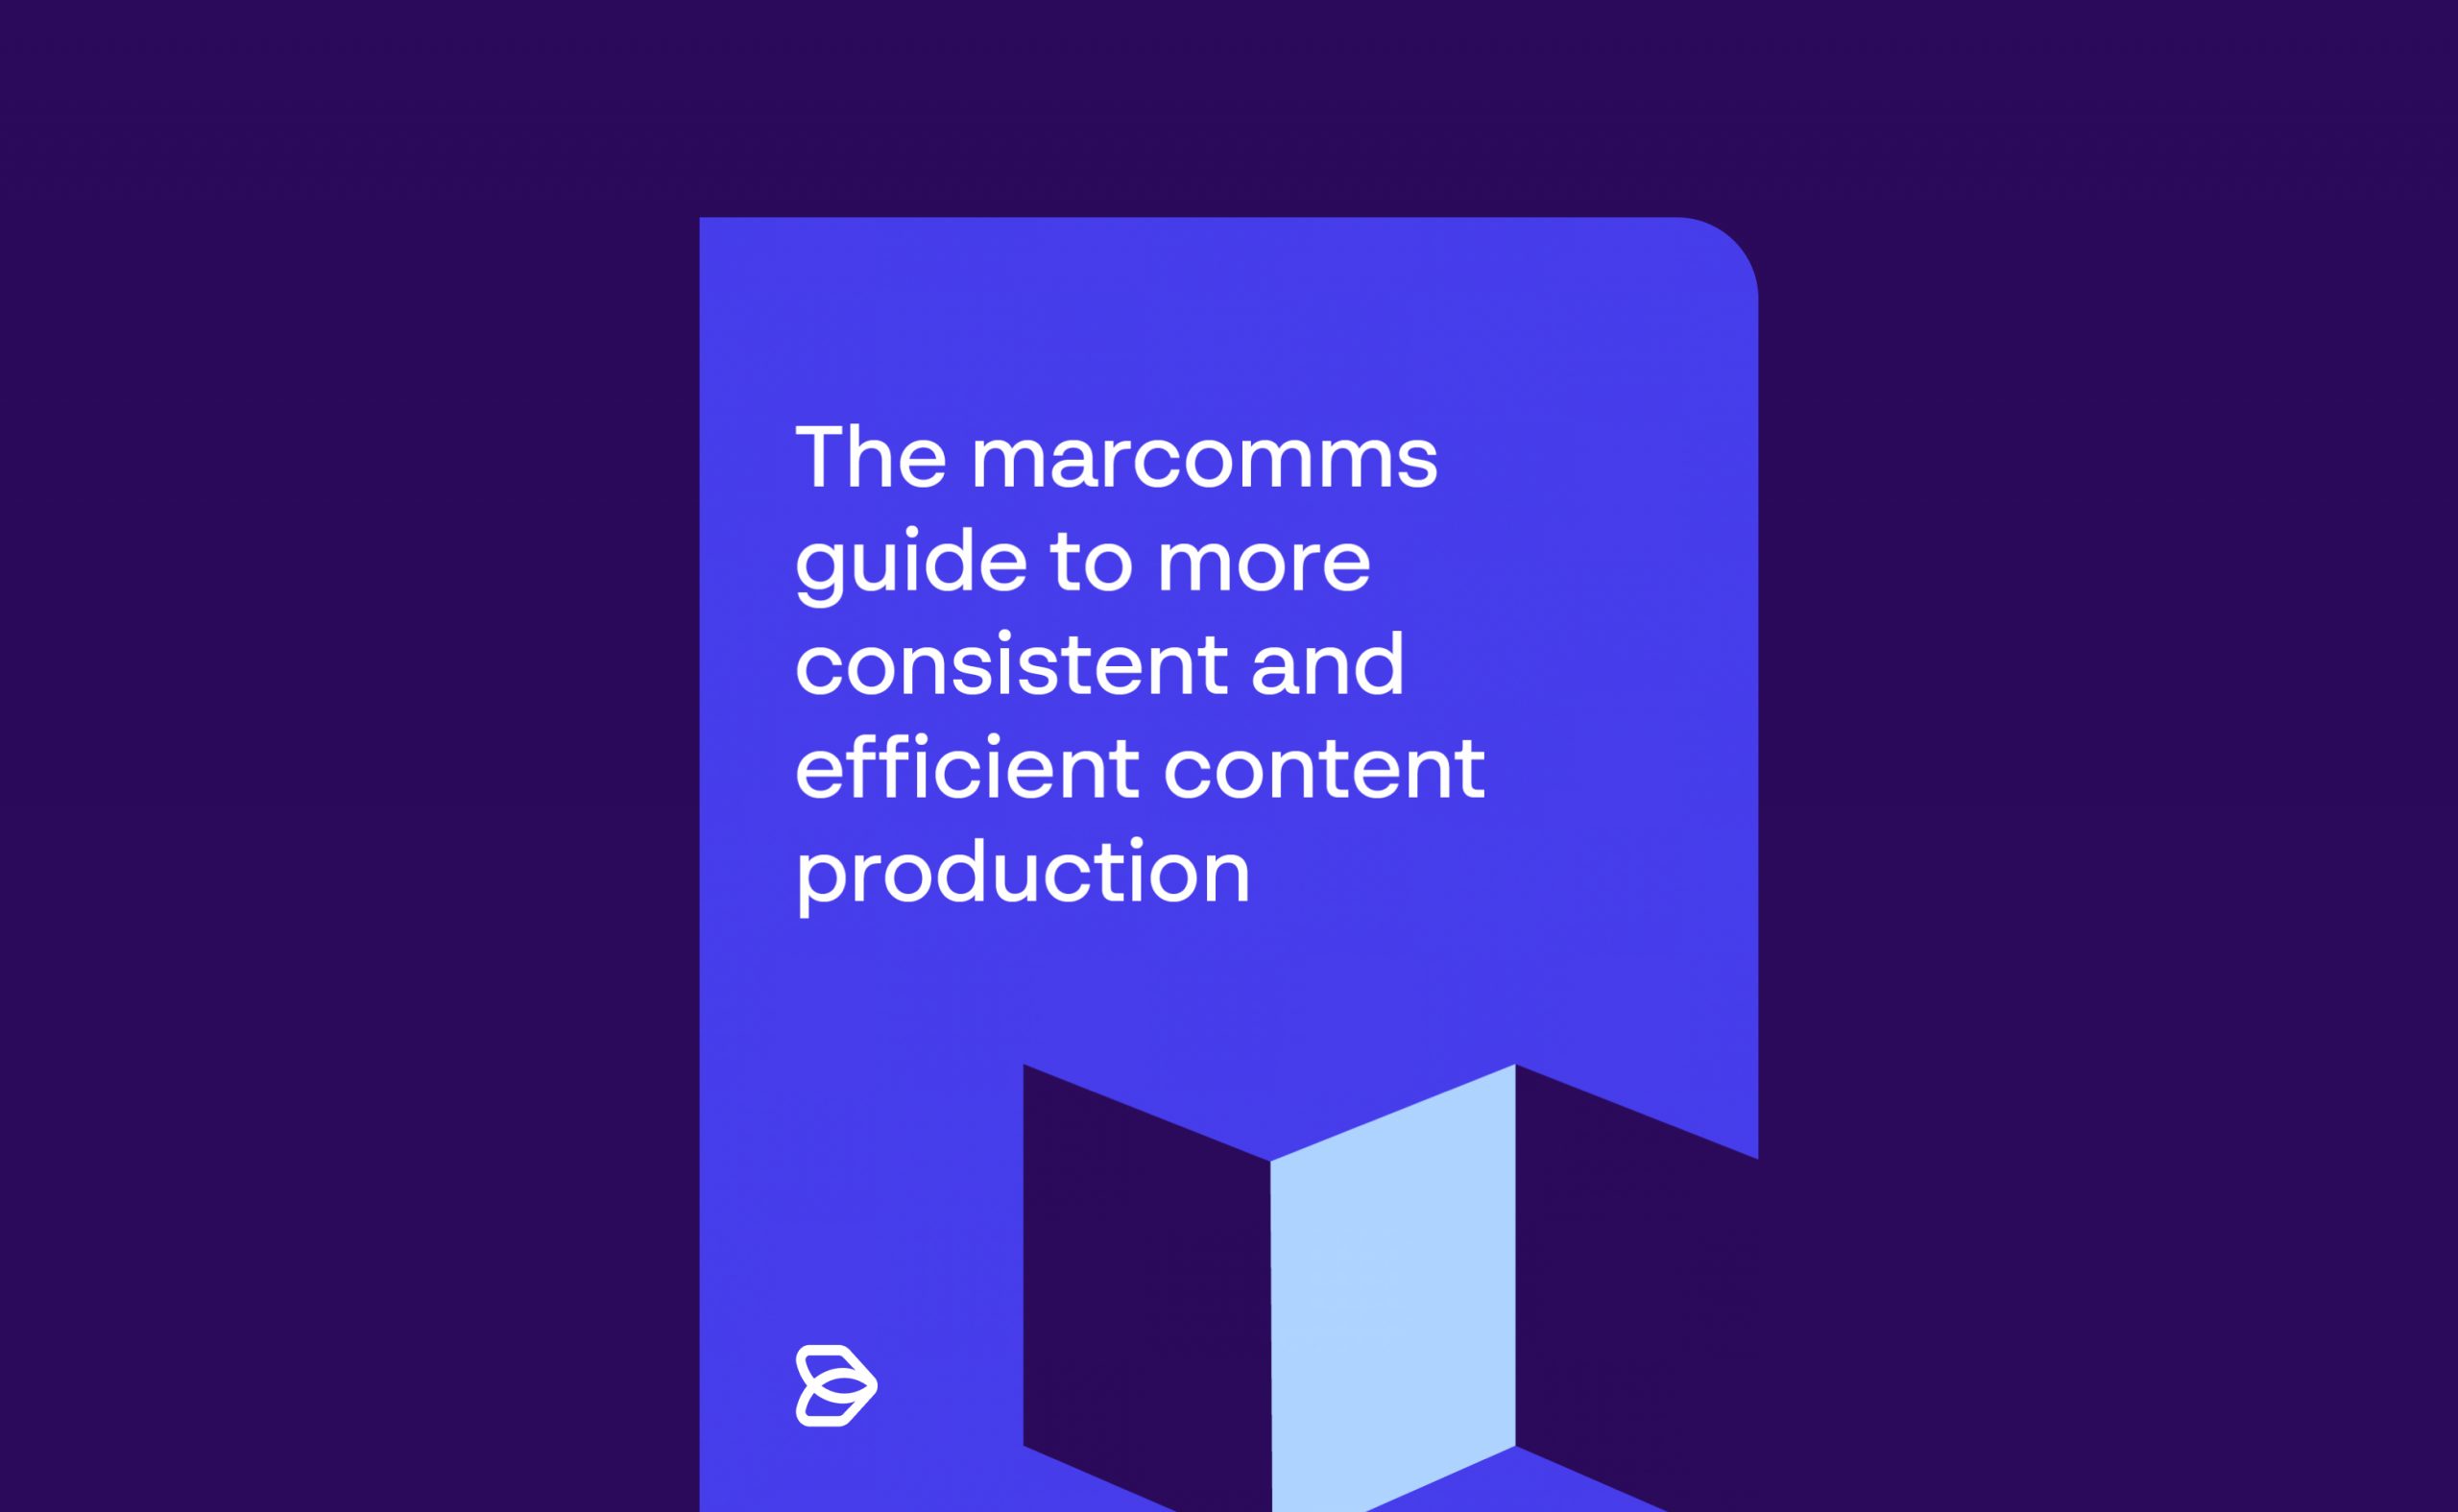 The-marcomms-guide-to-more-consistent-and-efficient-content-production